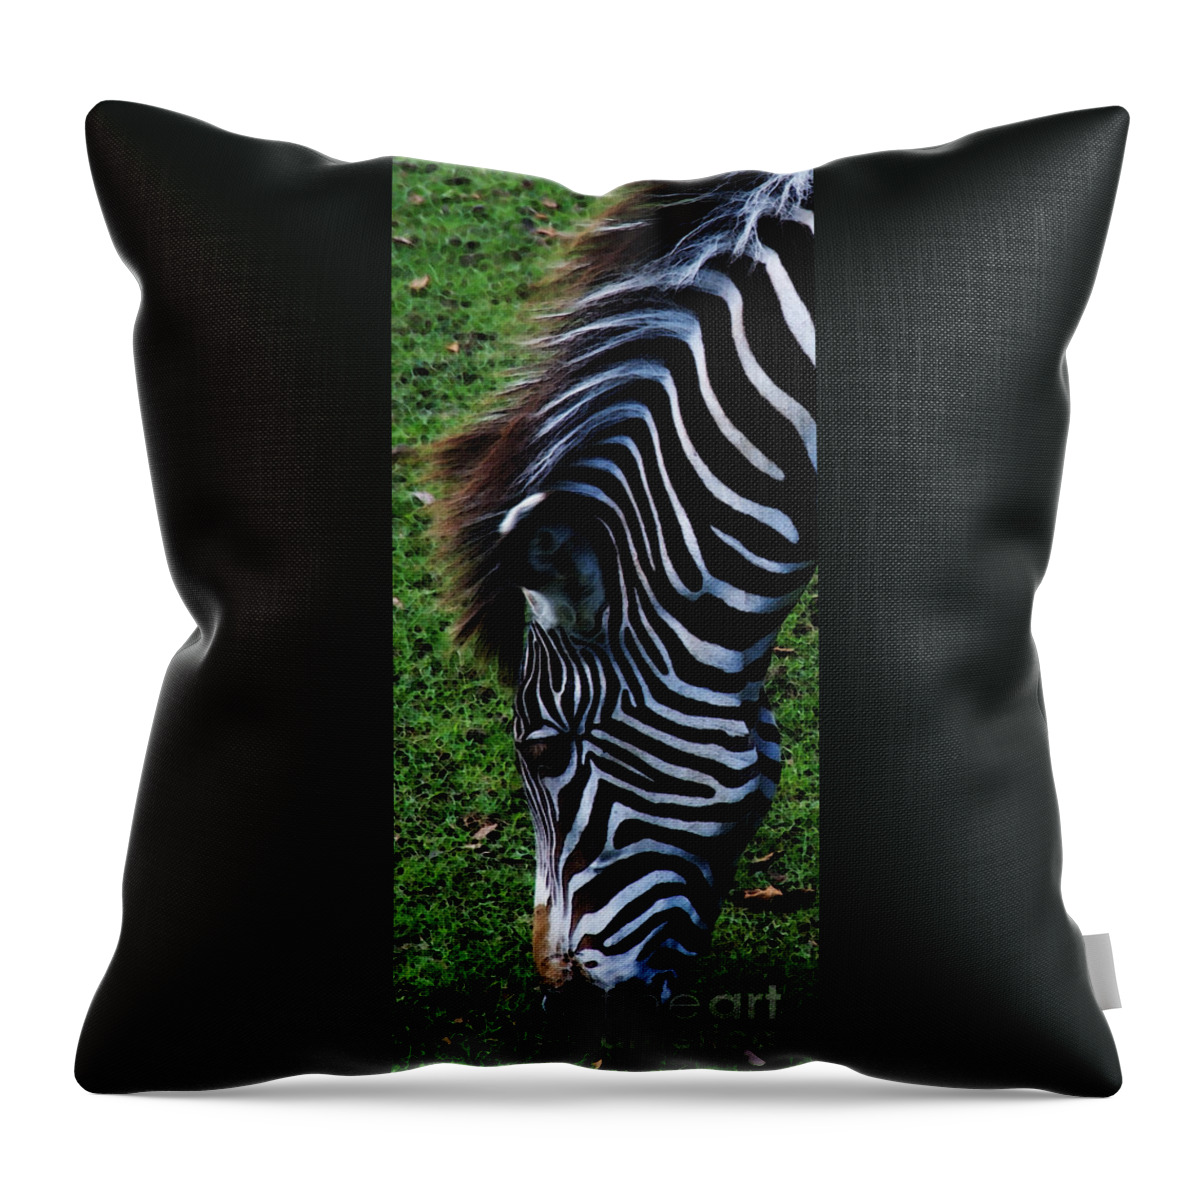 Zebra Throw Pillow featuring the photograph Uniquely Identifiable by Linda Shafer